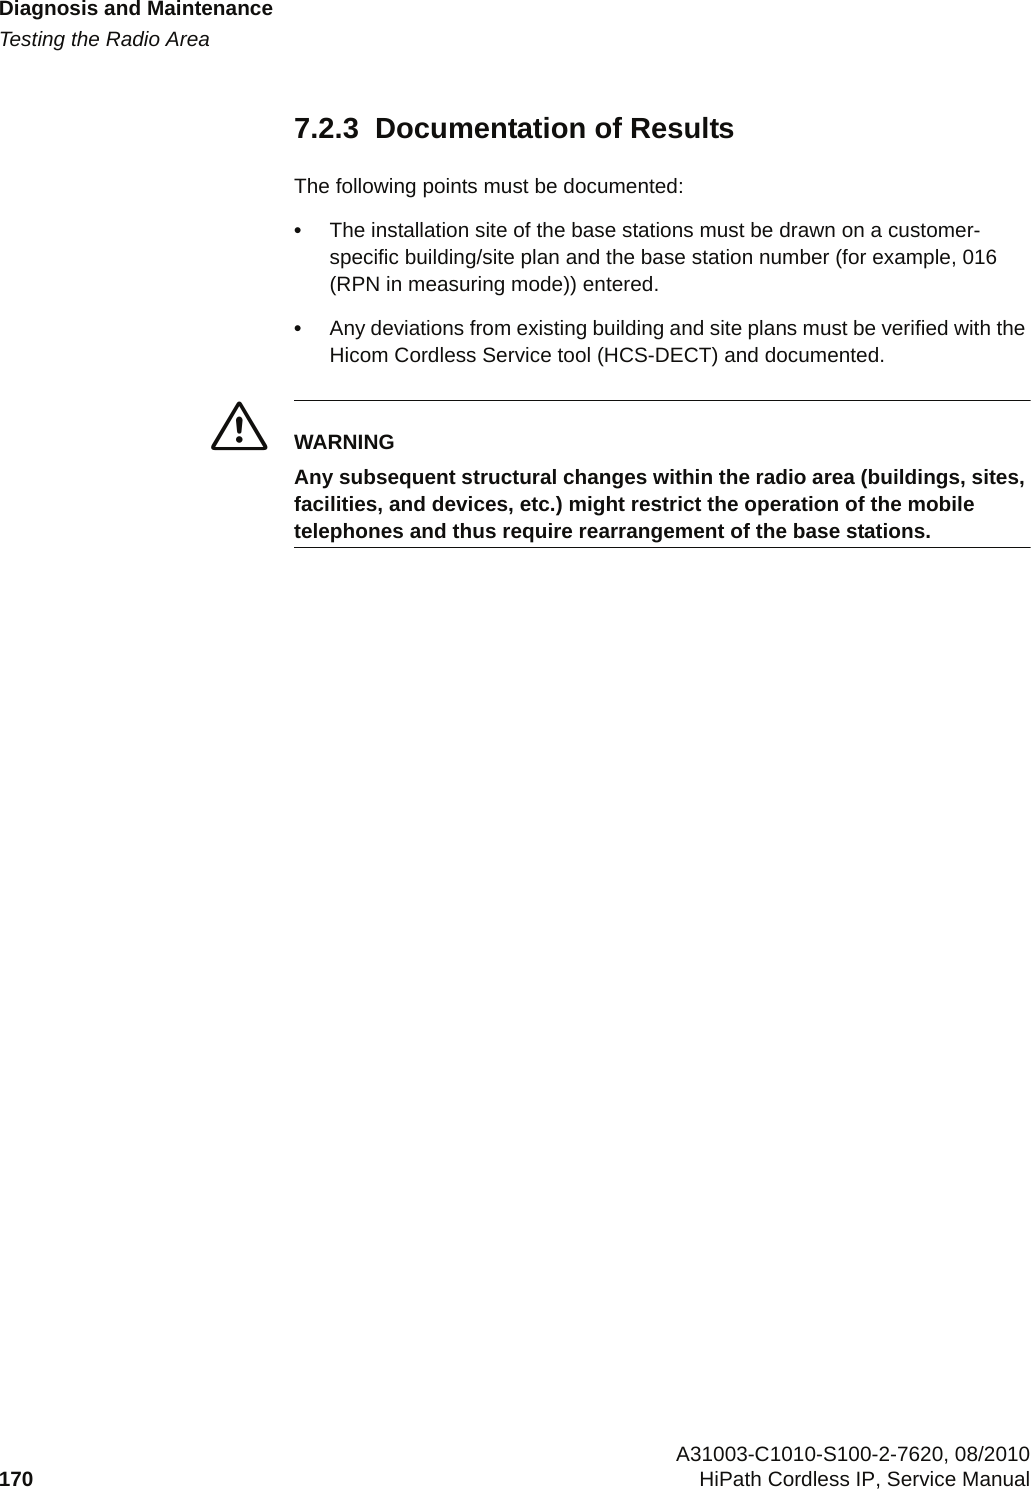 Diagnosis and Maintenancec07.fmTesting the Radio Area A31003-C1010-S100-2-7620, 08/2010170 HiPath Cordless IP, Service Manual          7.2.3  Documentation of ResultsThe following points must be documented:•The installation site of the base stations must be drawn on a customer-specific building/site plan and the base station number (for example, 016 (RPN in measuring mode)) entered.•Any deviations from existing building and site plans must be verified with the Hicom Cordless Service tool (HCS-DECT) and documented.7WARNINGAny subsequent structural changes within the radio area (buildings, sites, facilities, and devices, etc.) might restrict the operation of the mobile telephones and thus require rearrangement of the base stations.